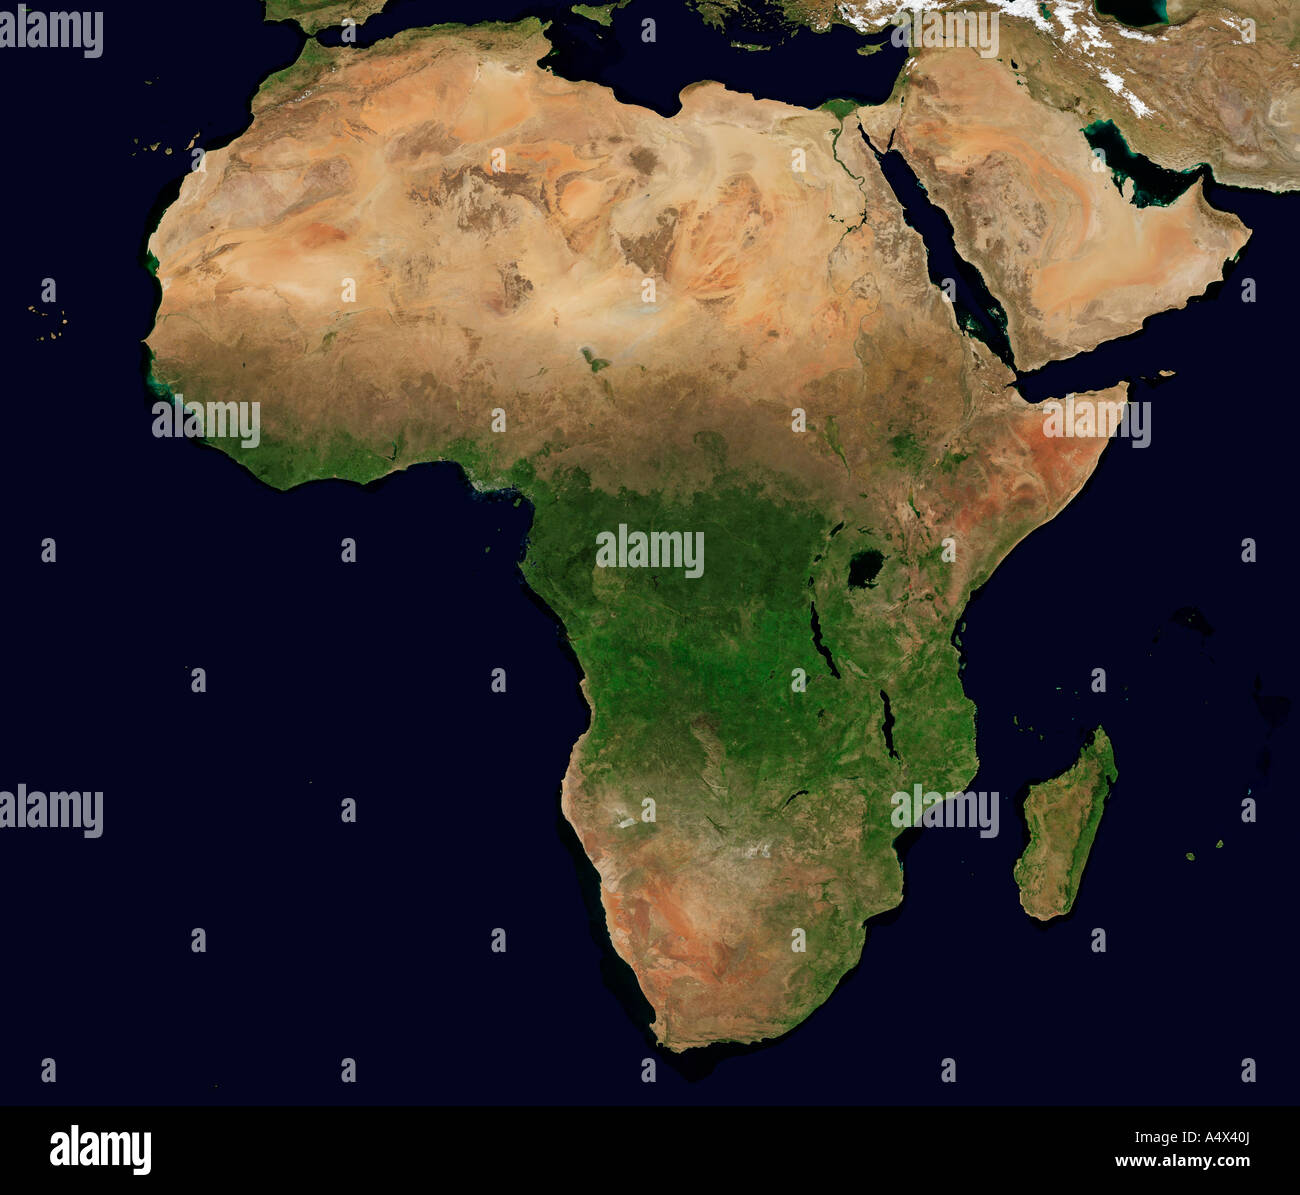 Africa and Arabia Optimised and enhanced version of an original NASA image Stock Photo